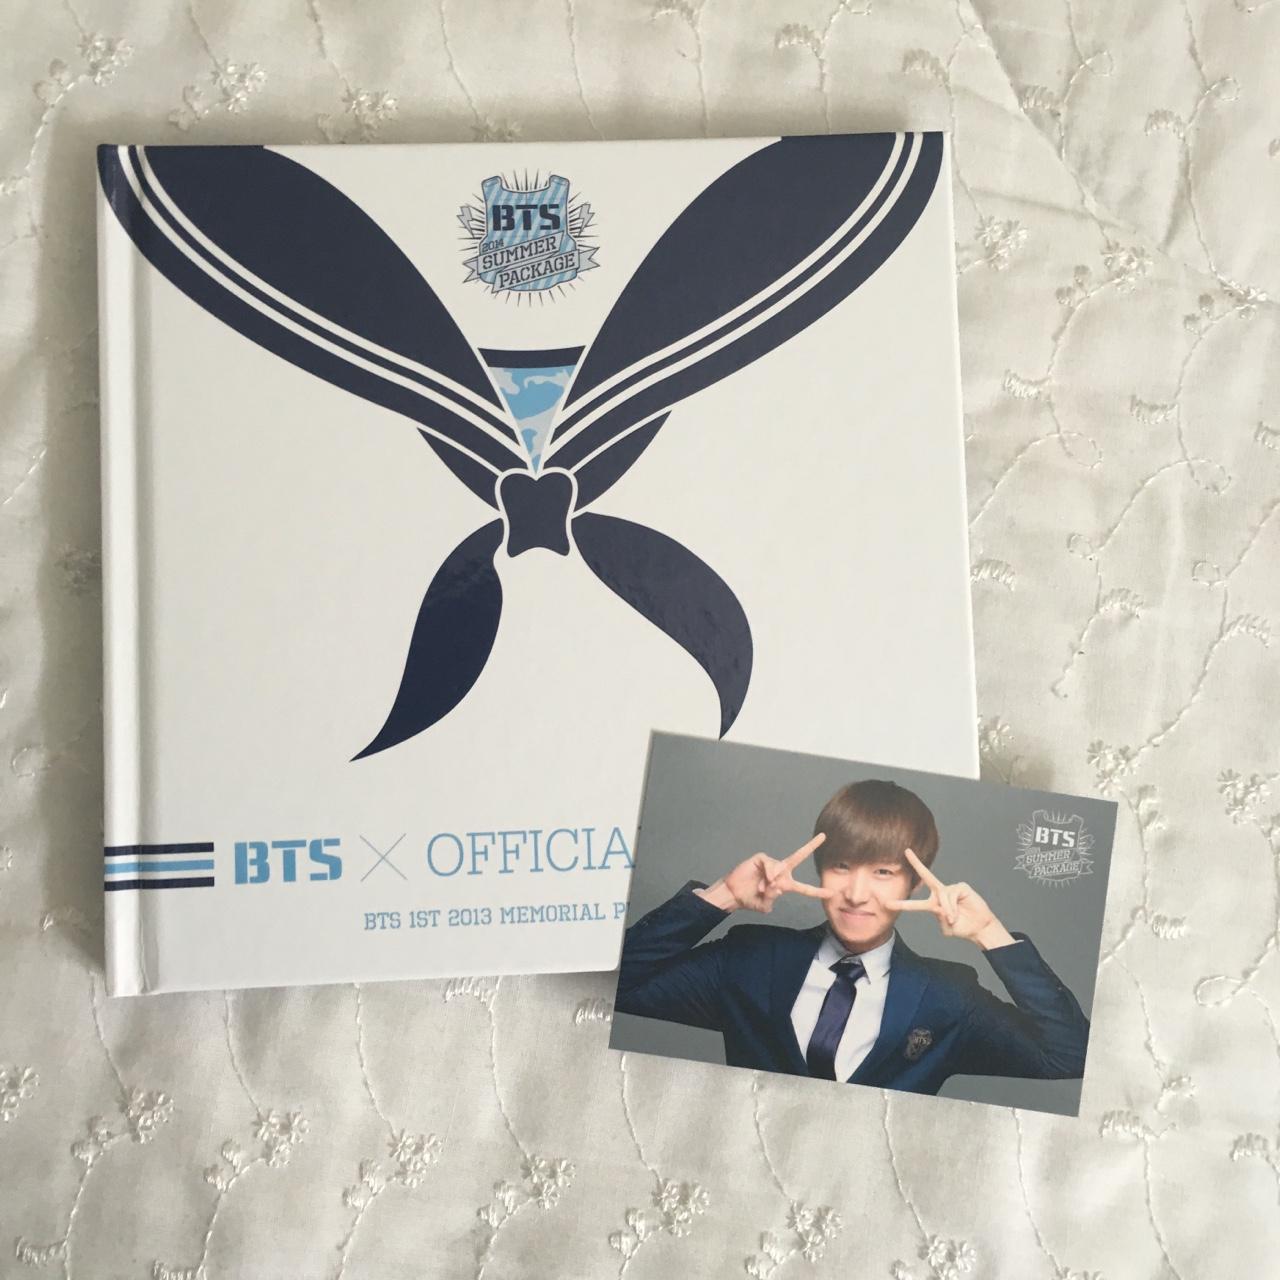 BTS summer package 2014 in great condition all items